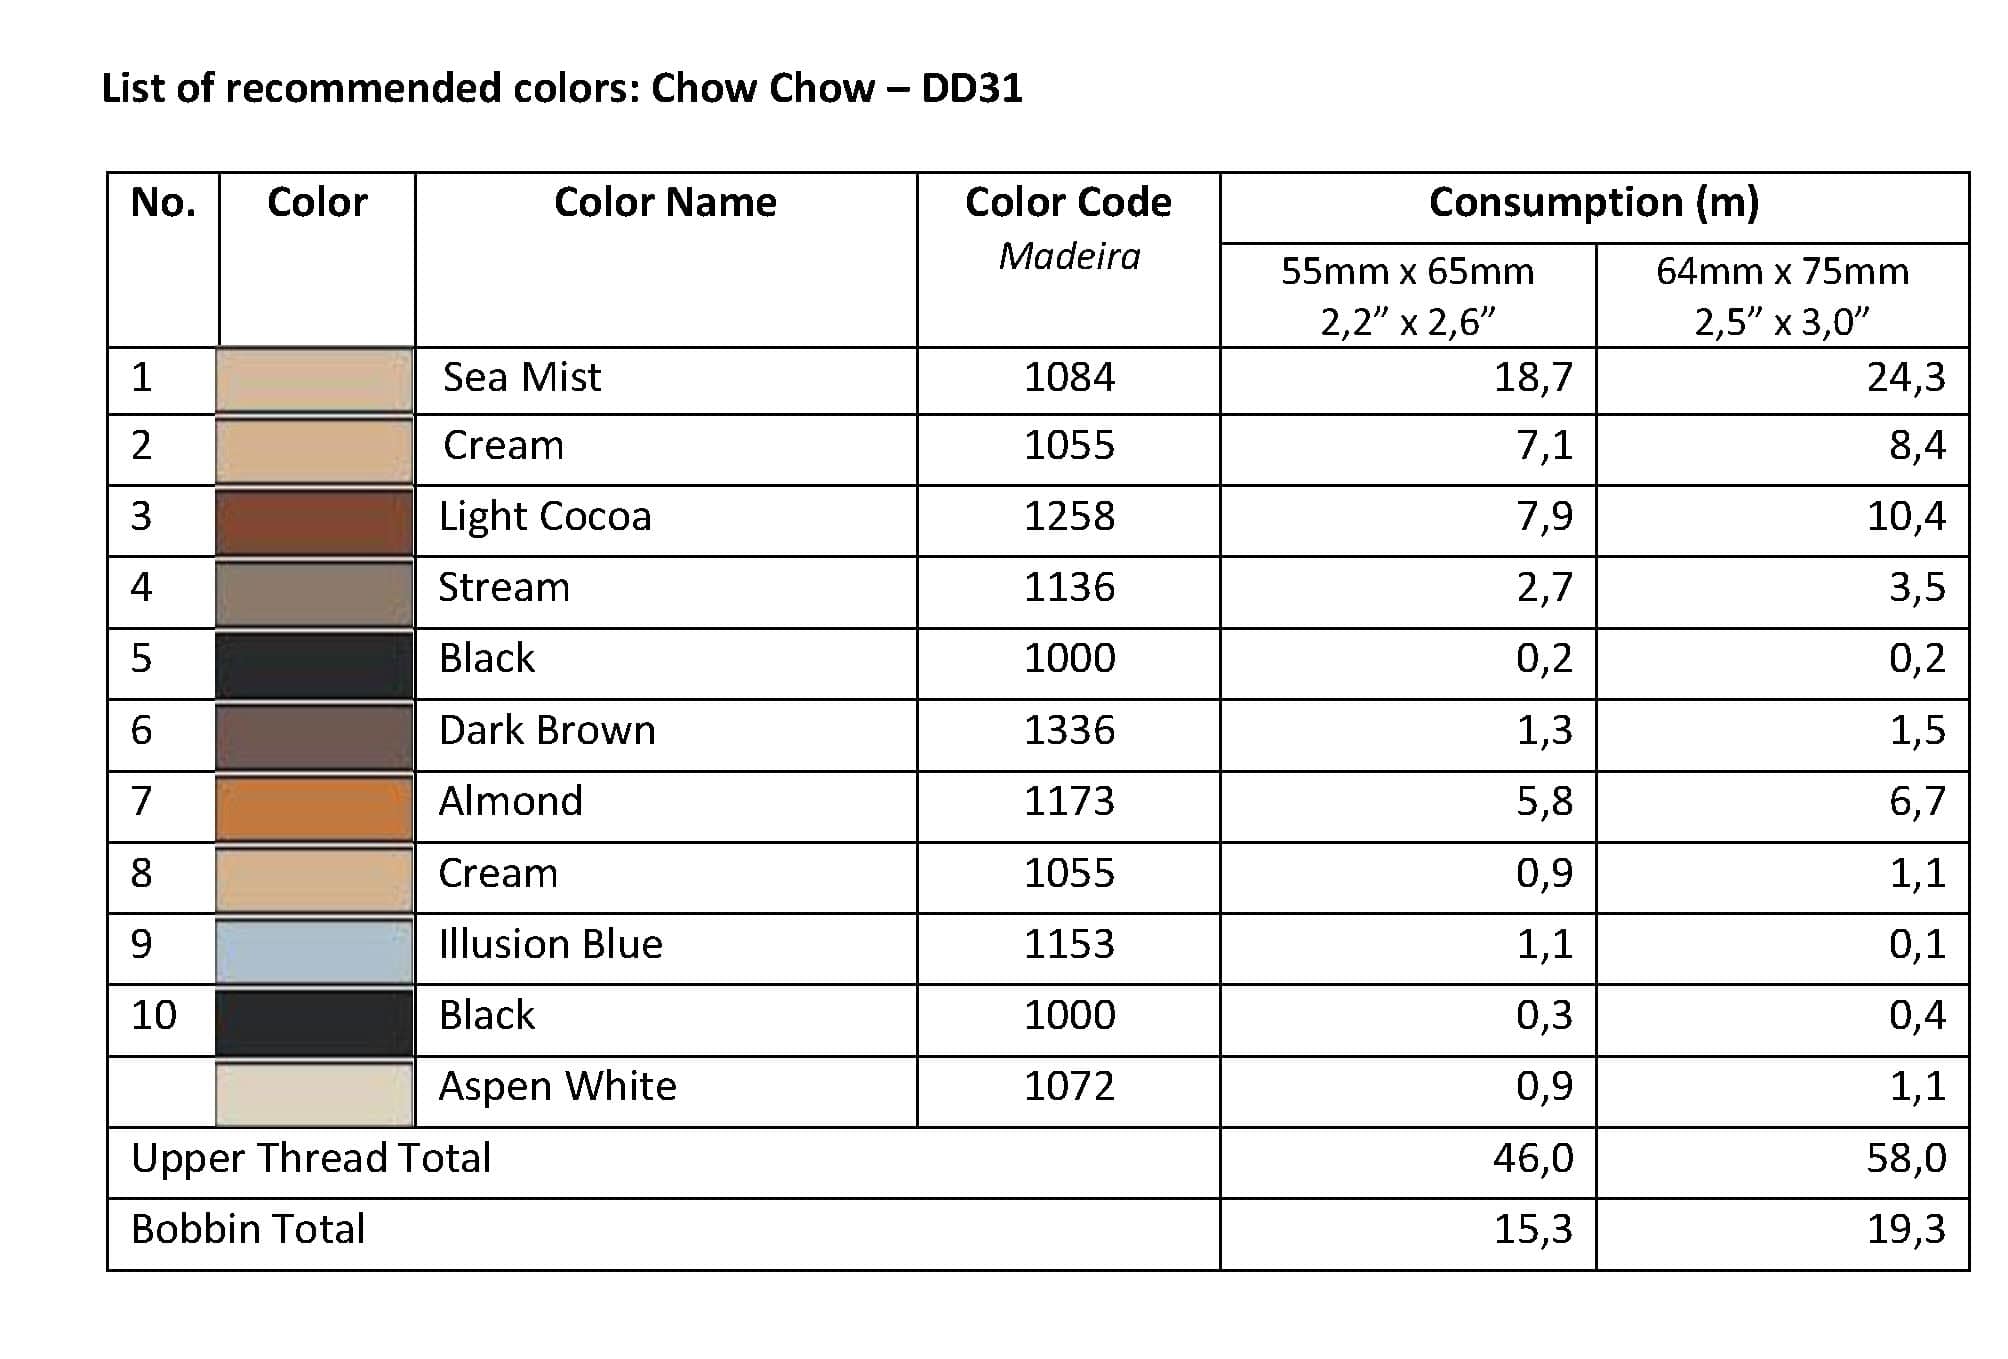 List of Recommended Colors - Chow-Chow DD31